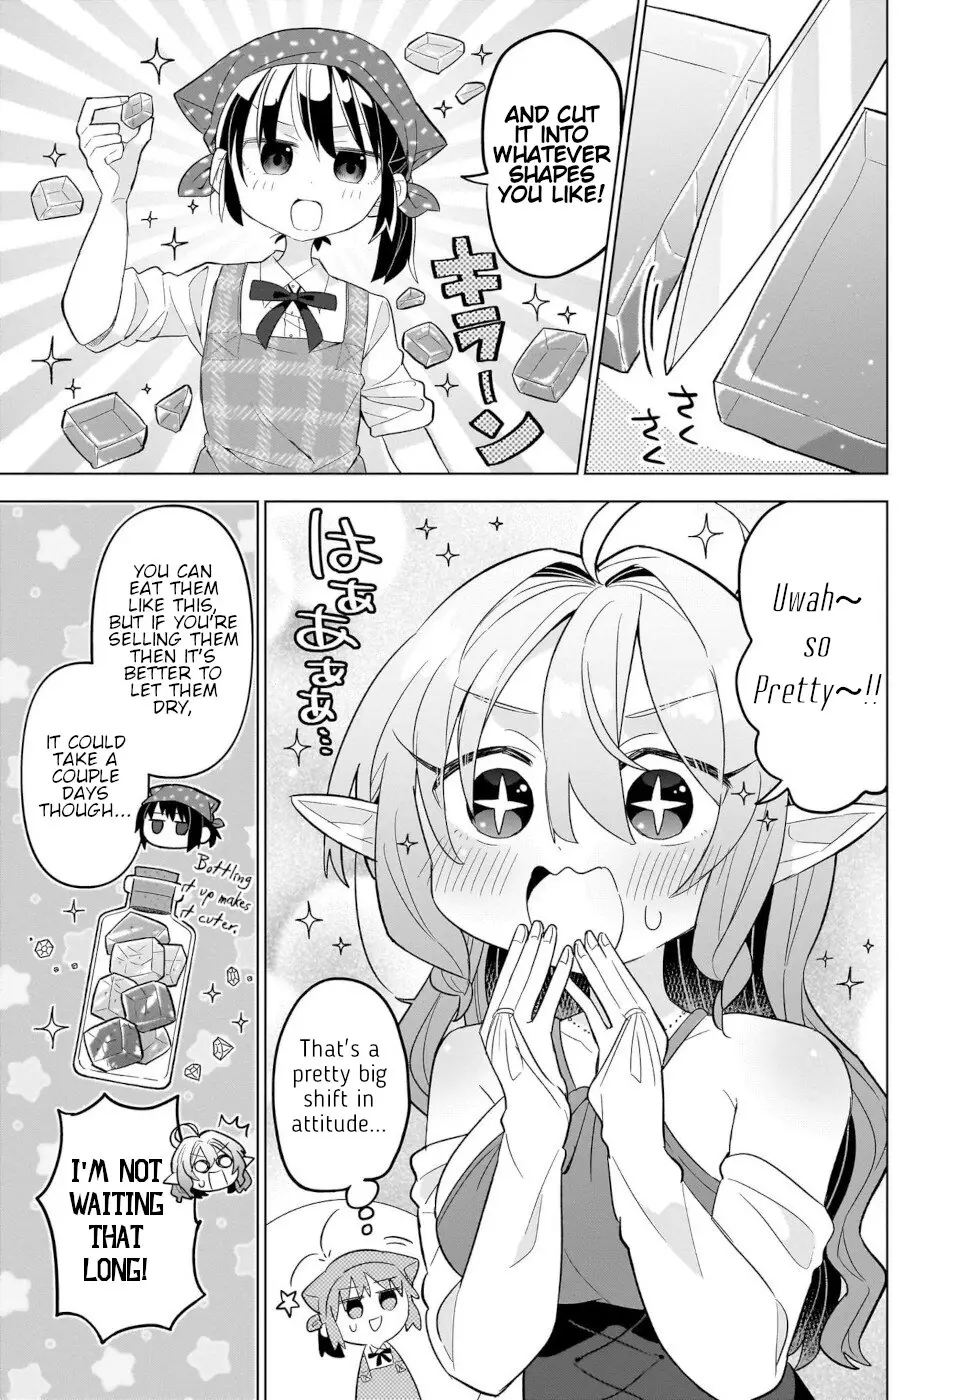 Sweets, Elf, And A High School Girl - 3 page 13-8240c9a2